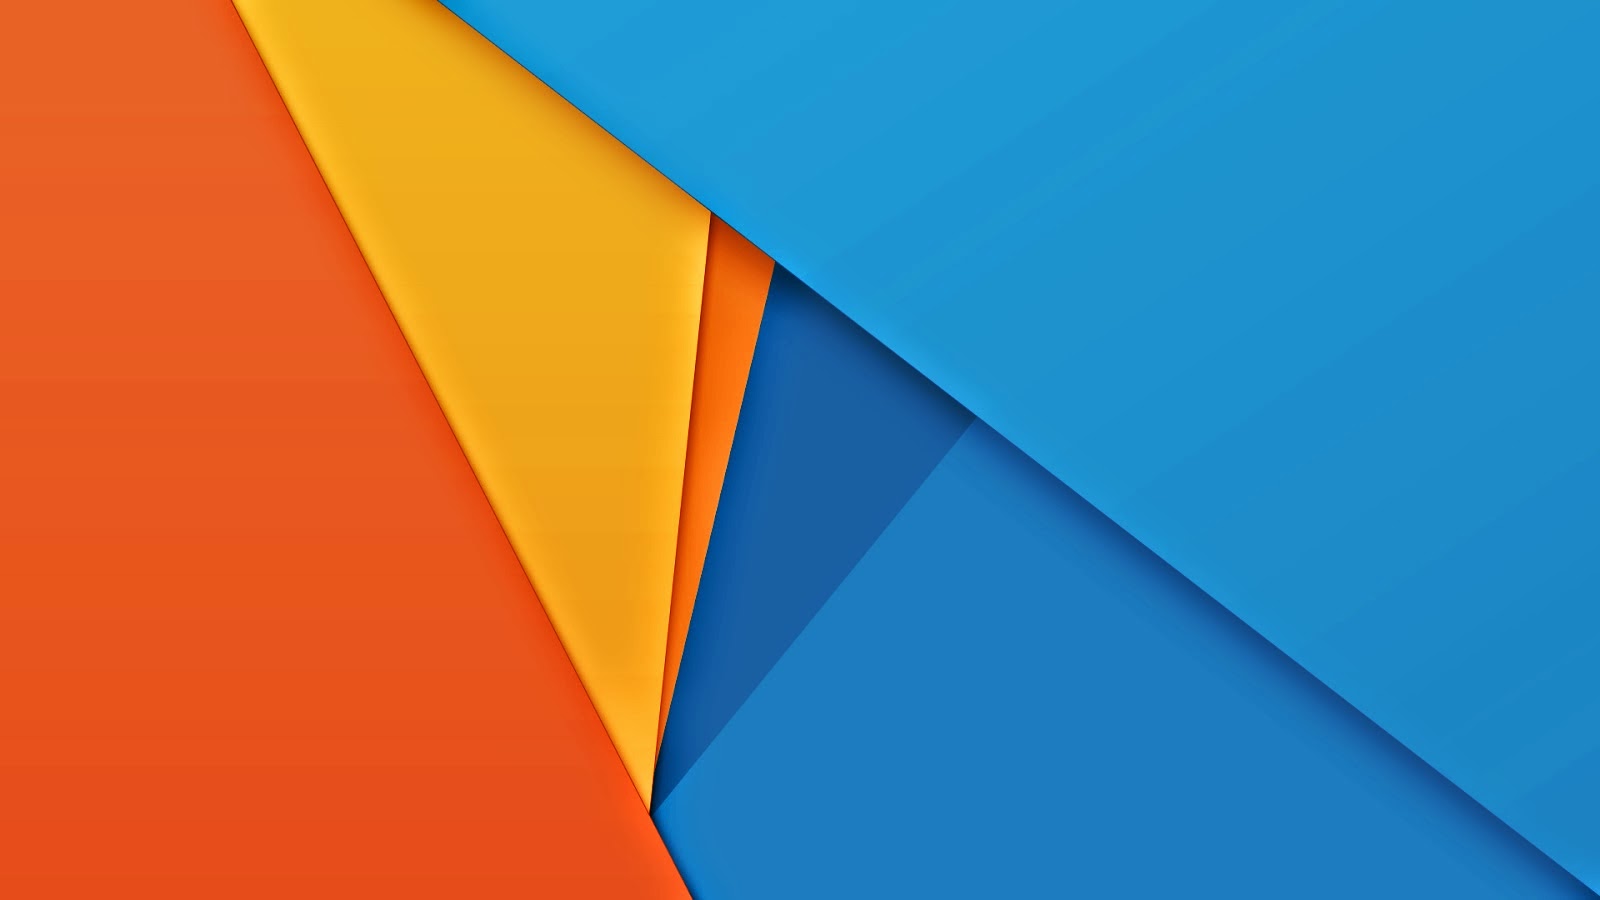 Top 3 Material Design Inspired Android Live Wallpaper Apps